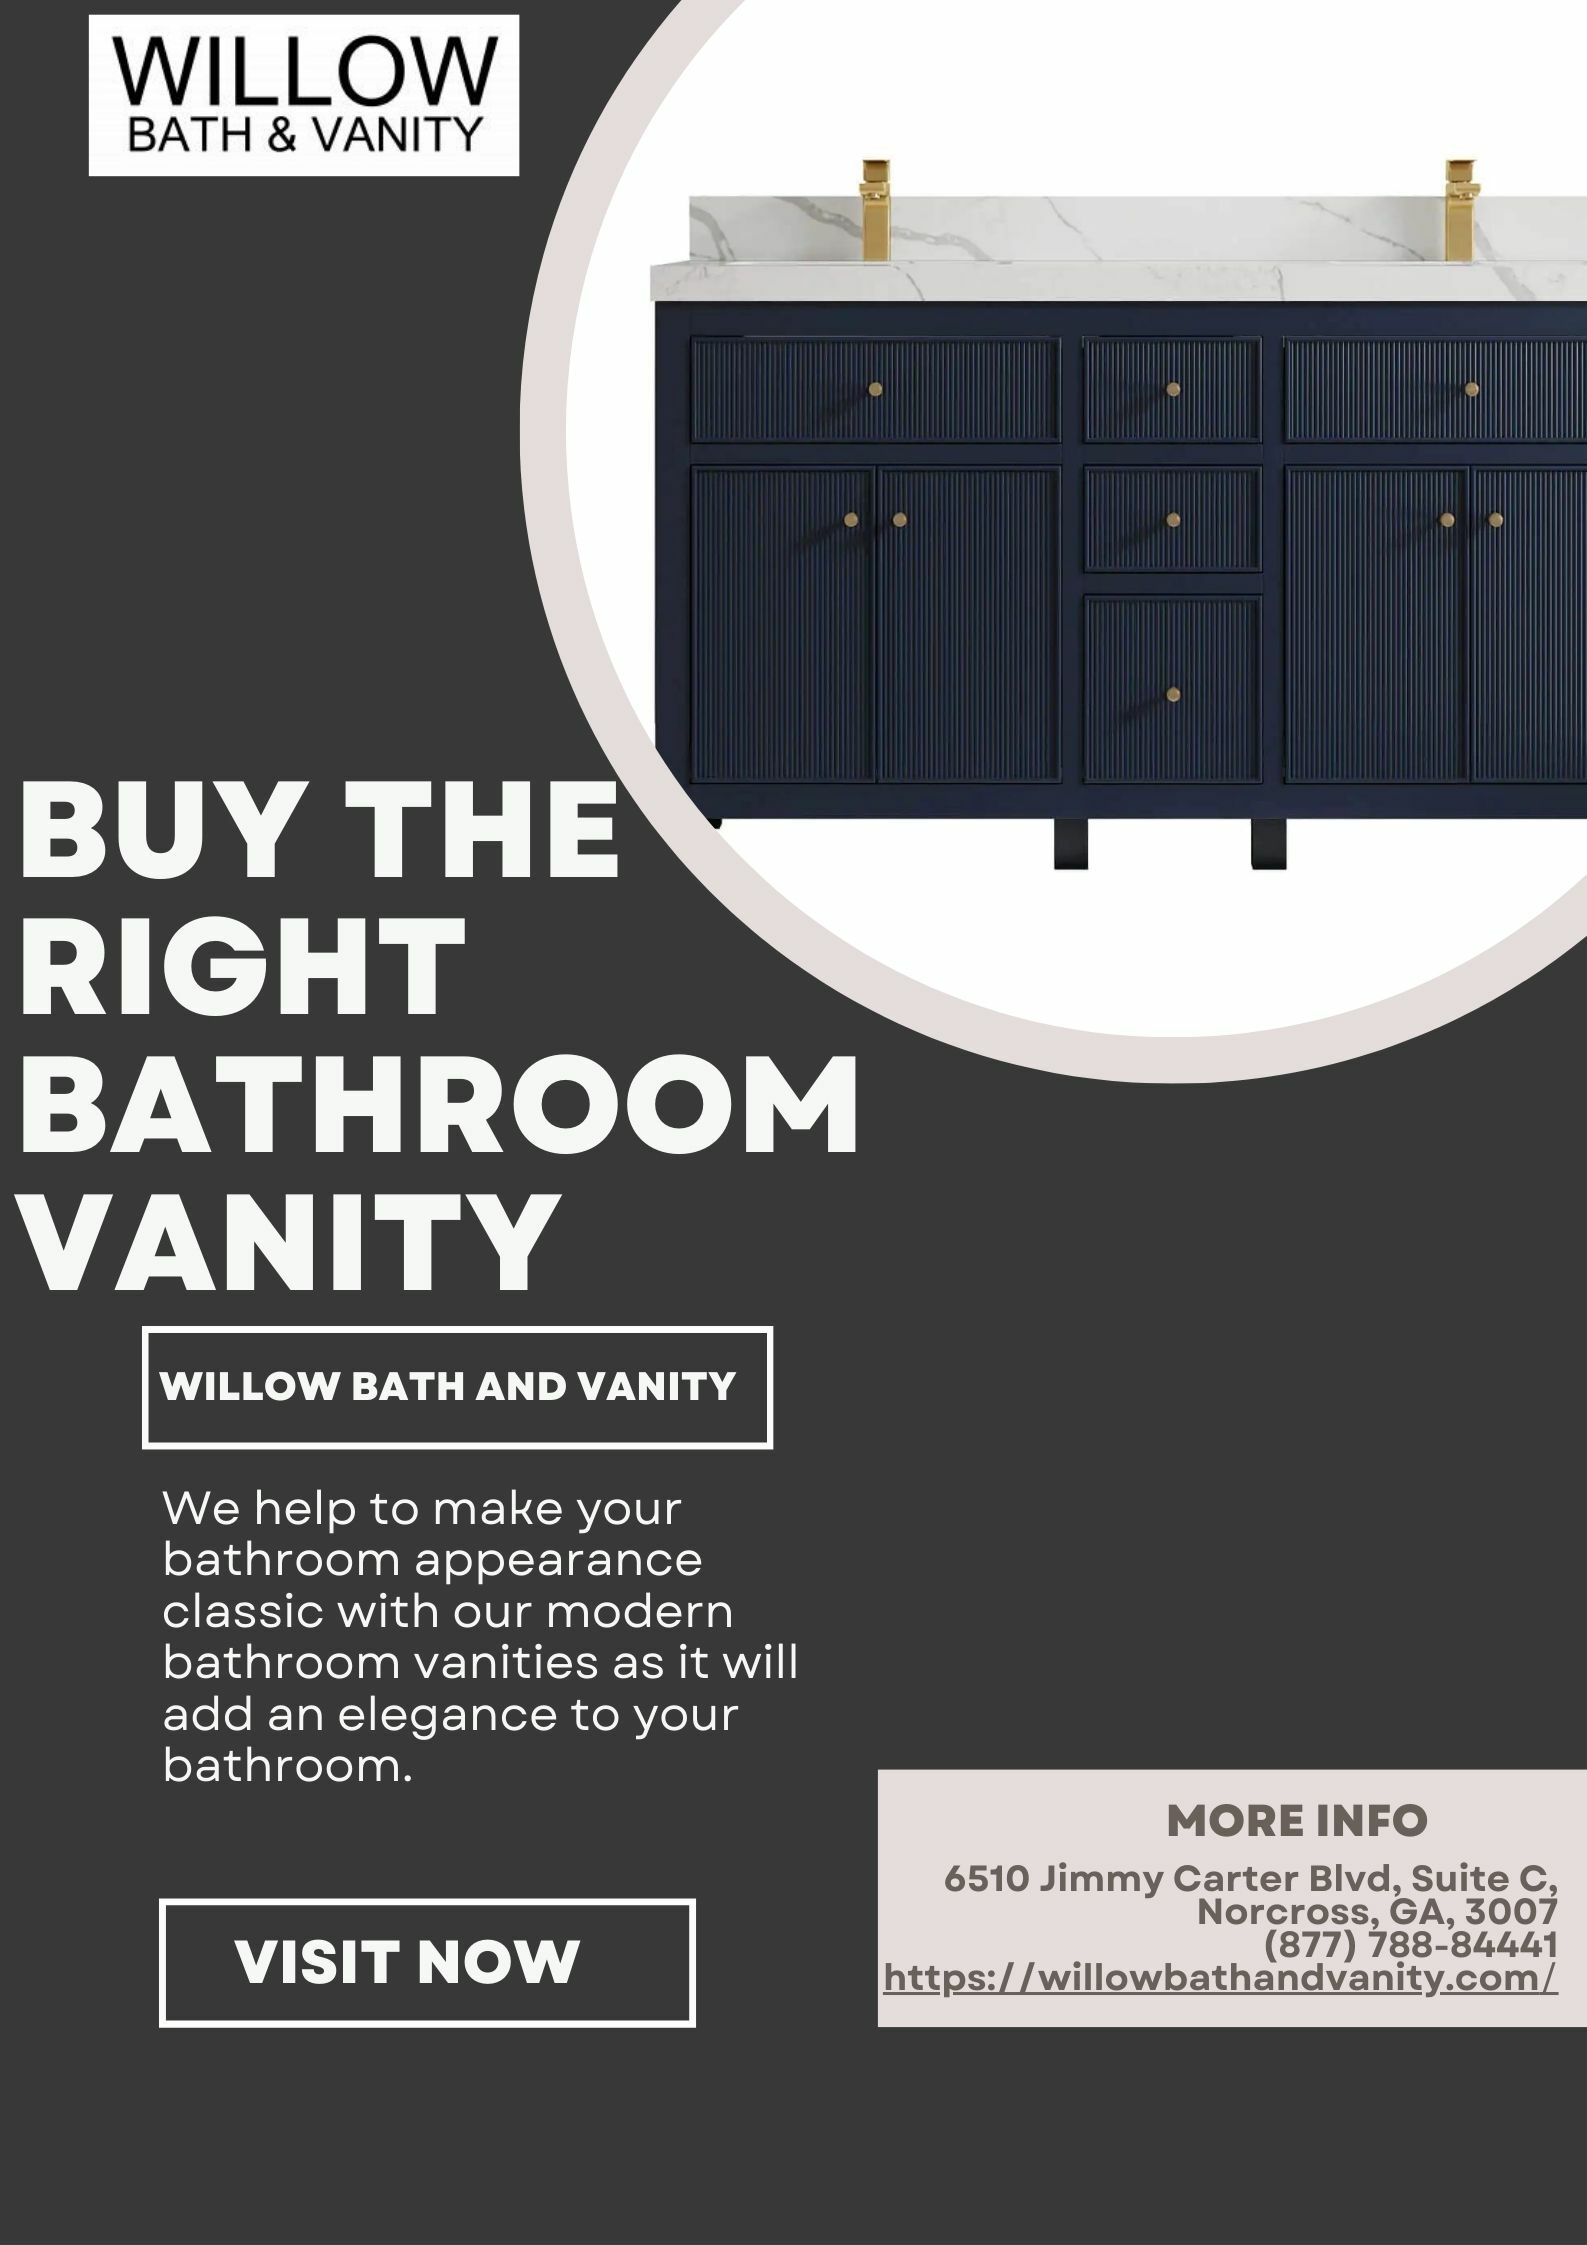 Add Elegance To Your Bathroom With Our Modern Bathroom Vanities